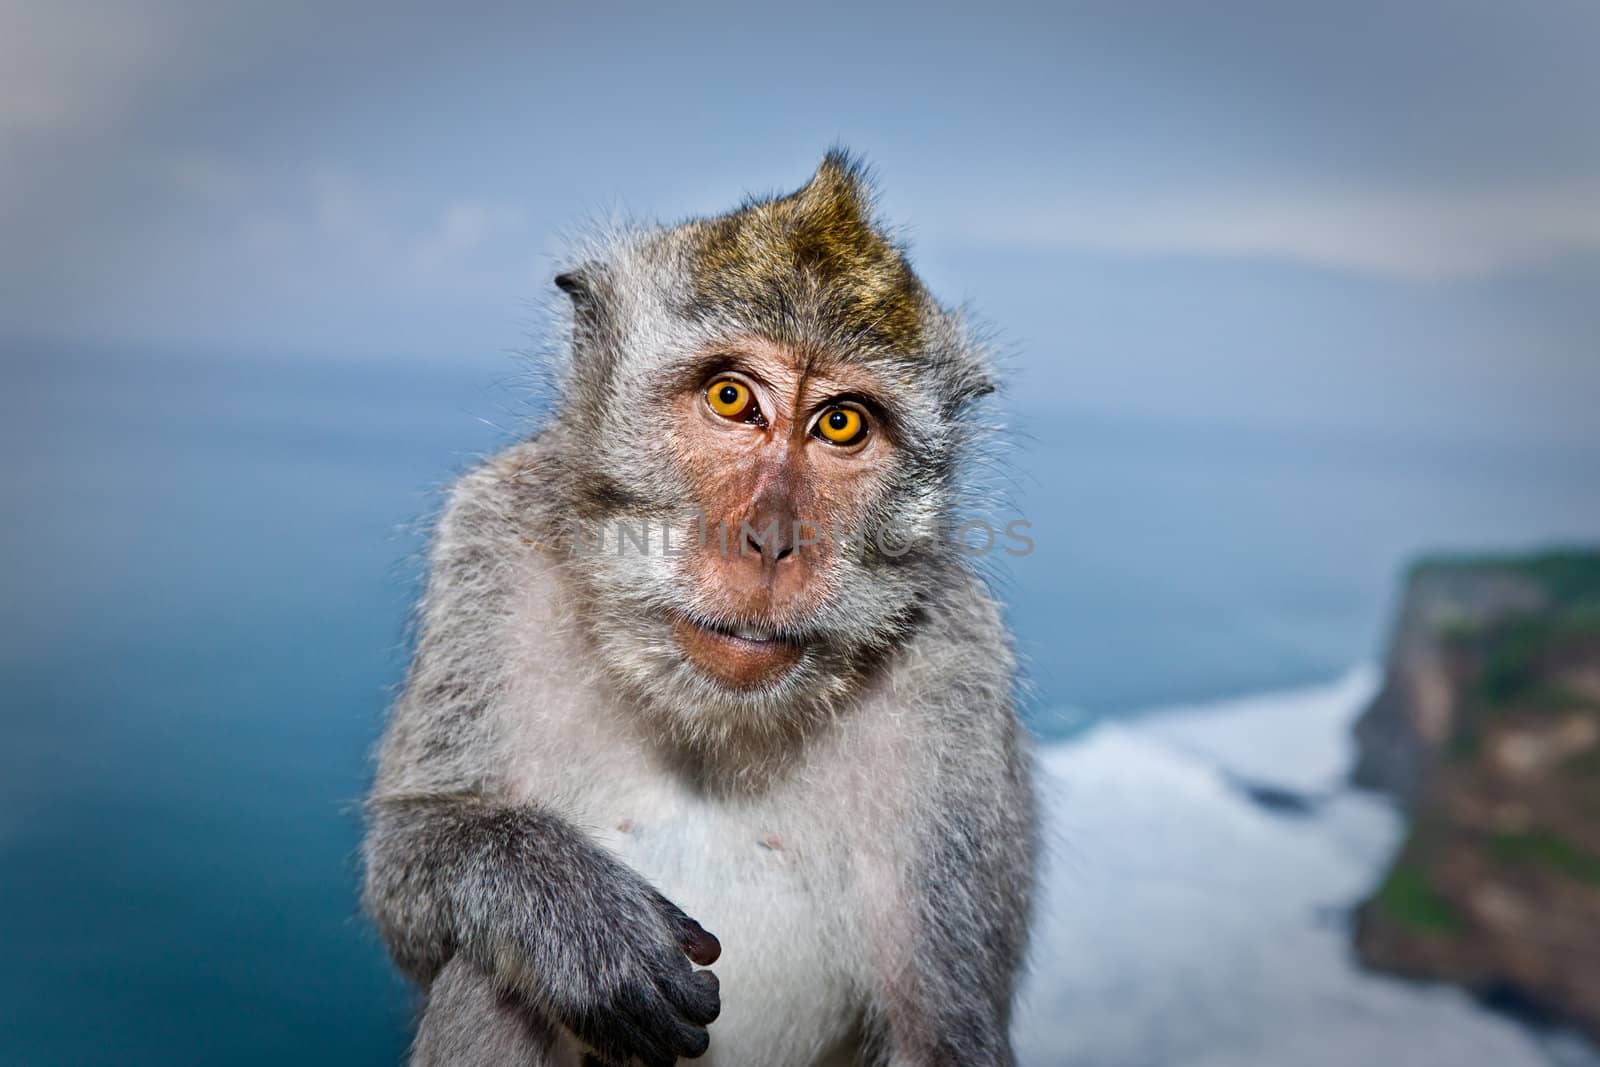 Beautiful photograph of a monkey giving funny expression for the camera in Bali.